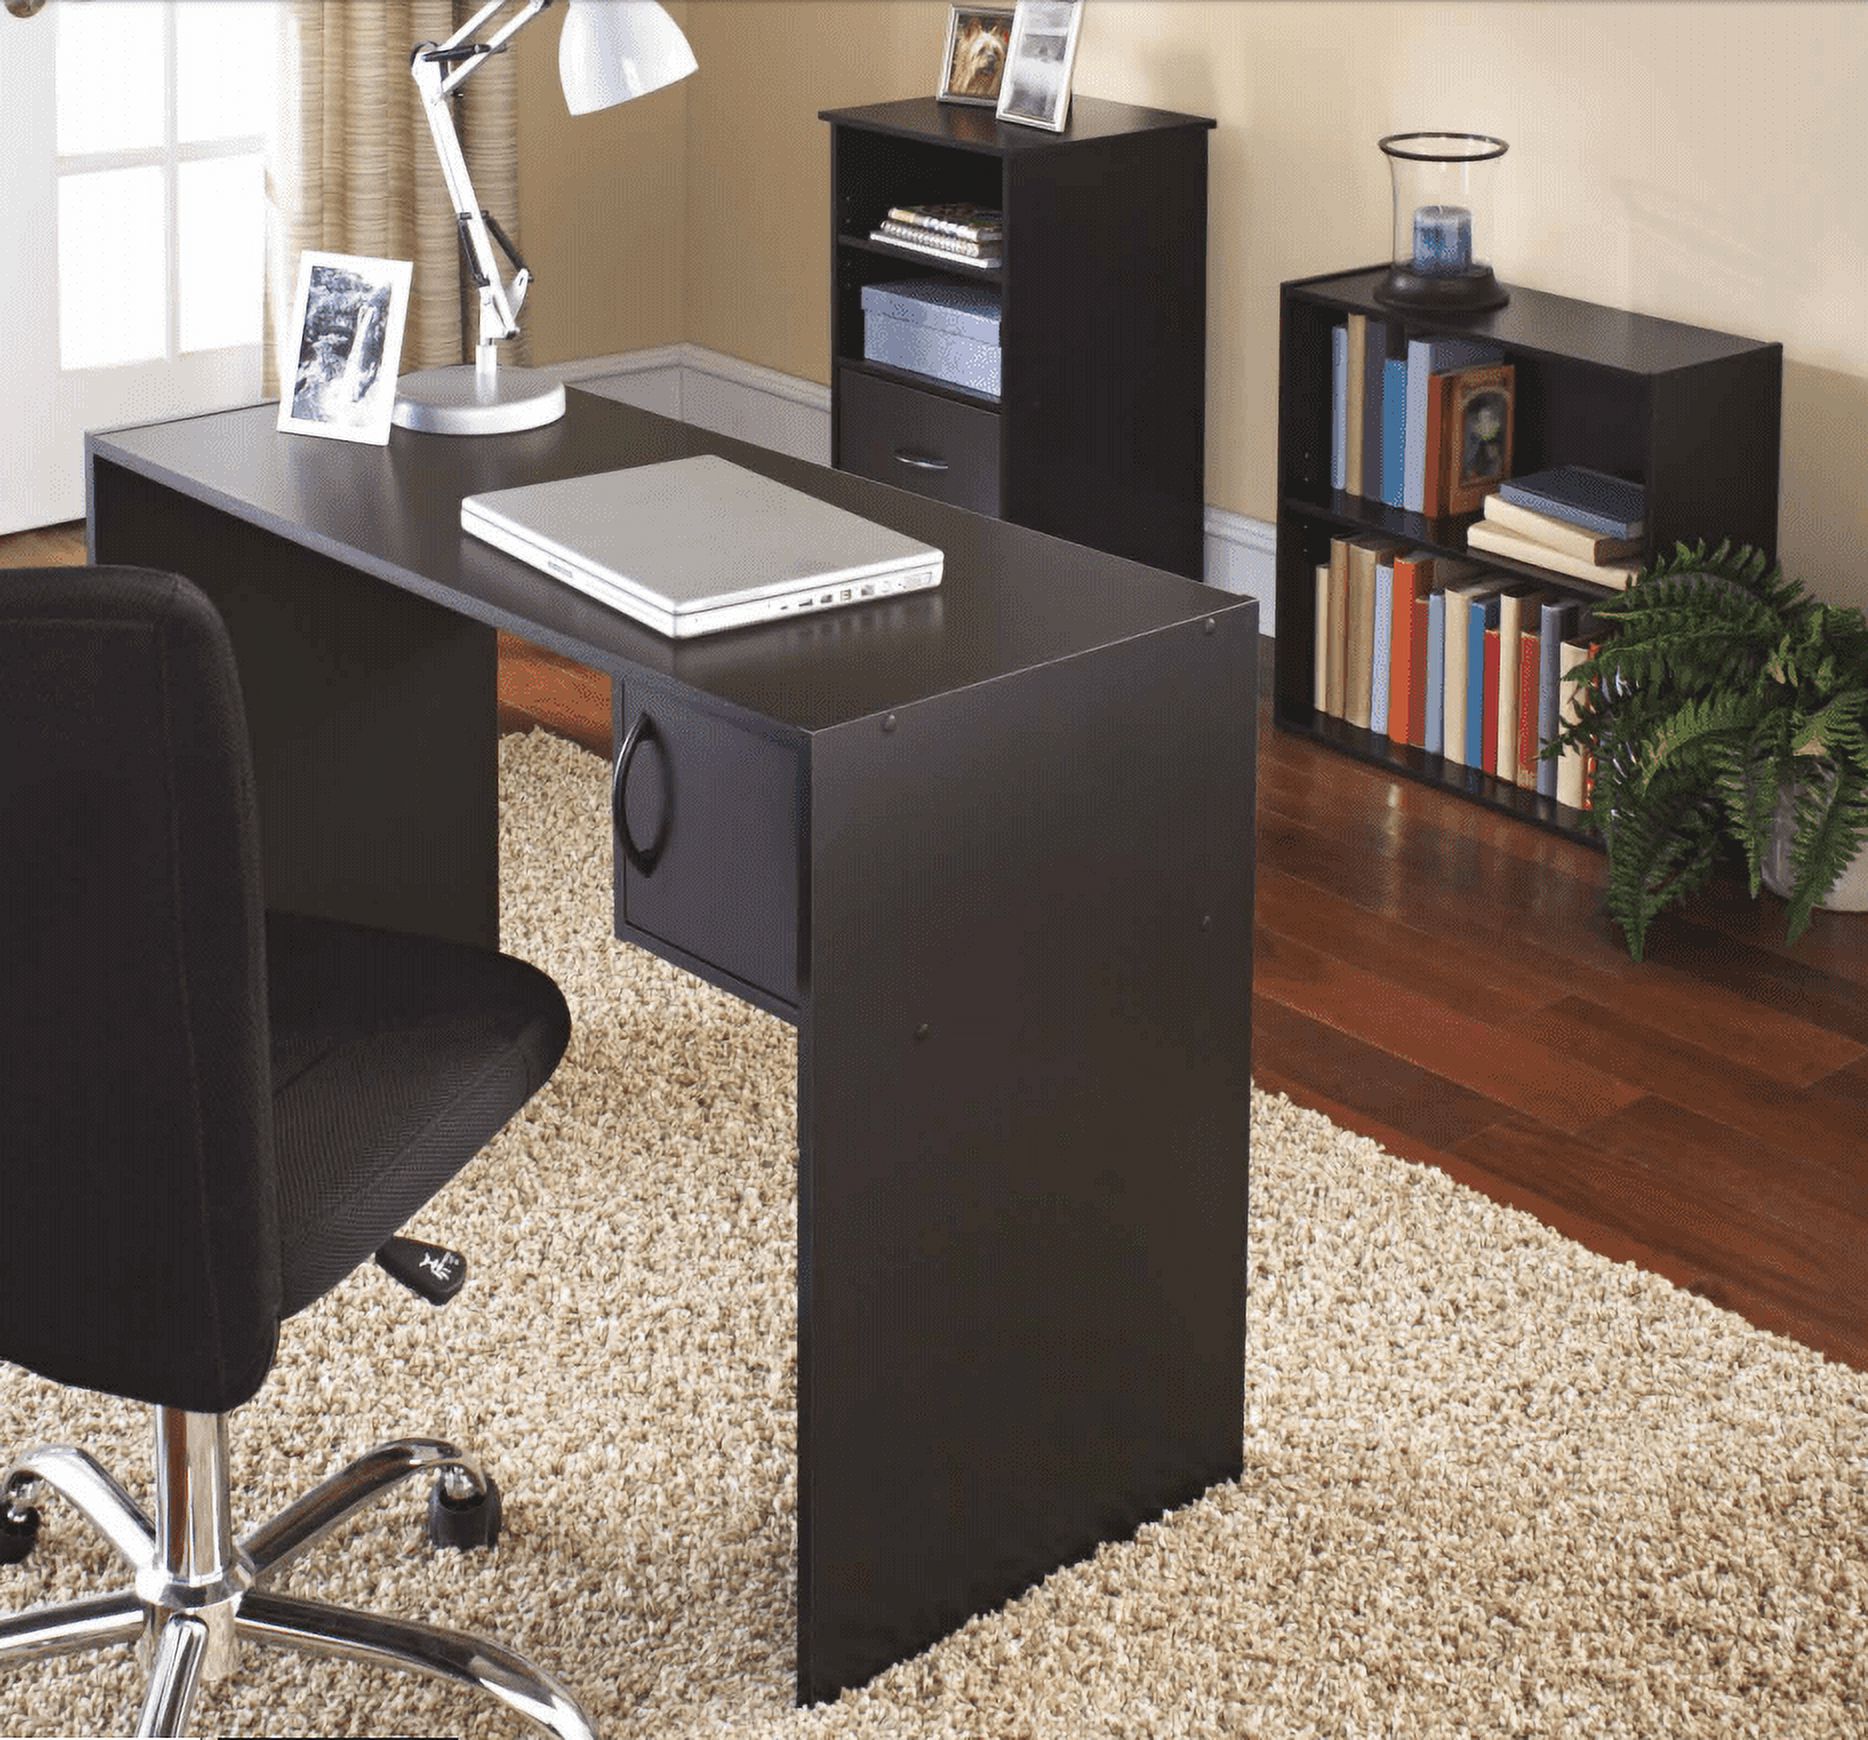 Mainstays 3-Piece Desk and Bookcase Office Set, Black Finish - image 2 of 6